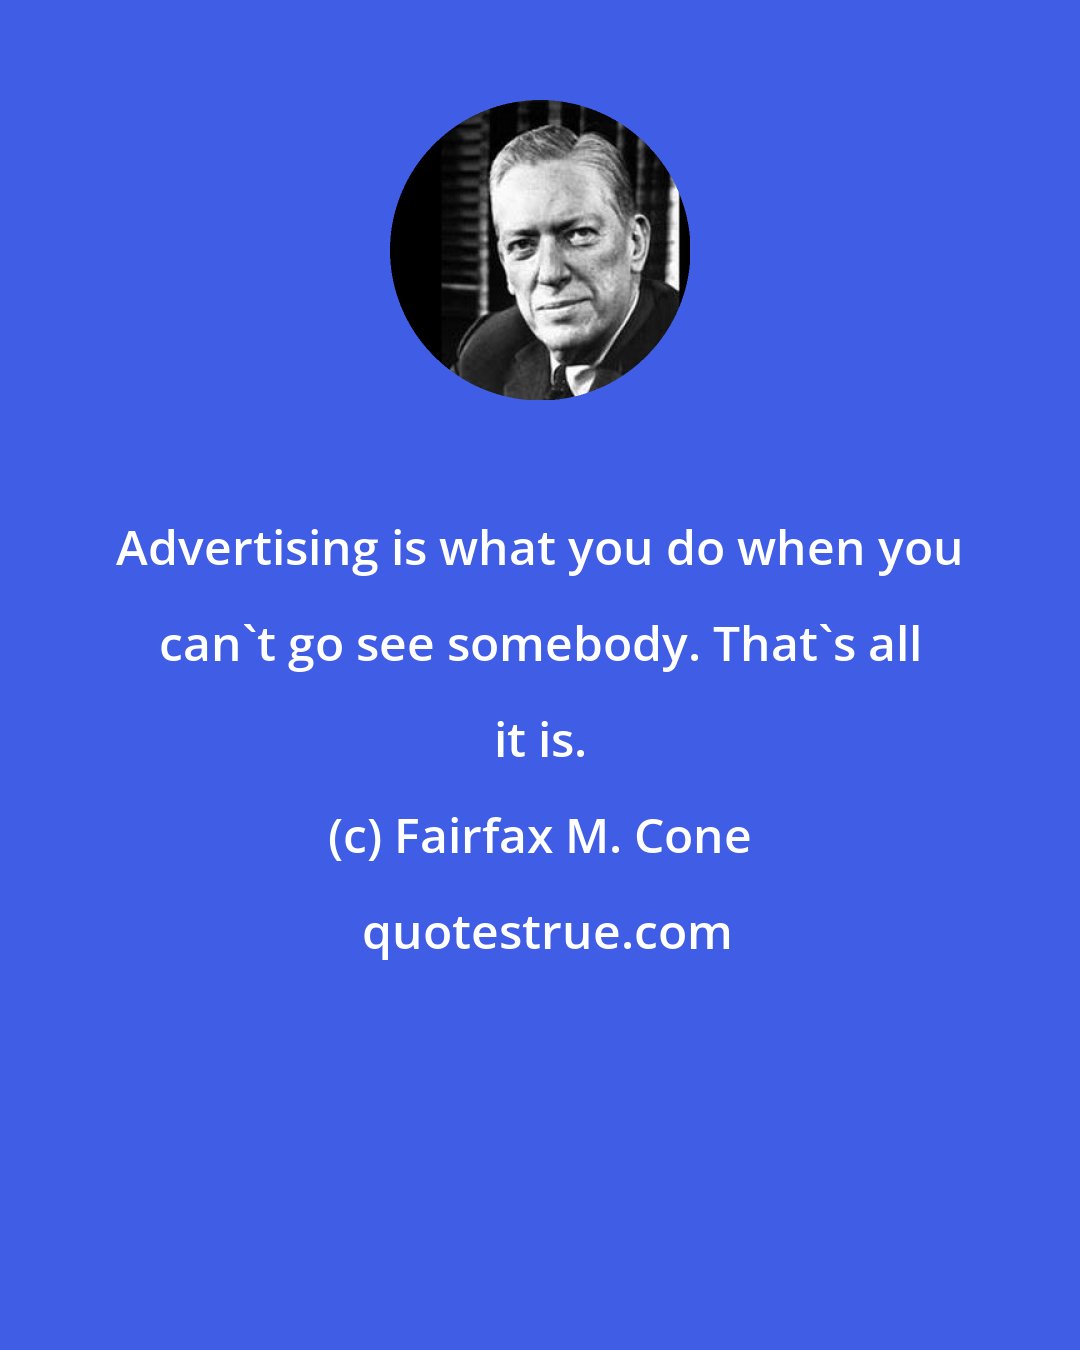 Fairfax M. Cone: Advertising is what you do when you can't go see somebody. That's all it is.